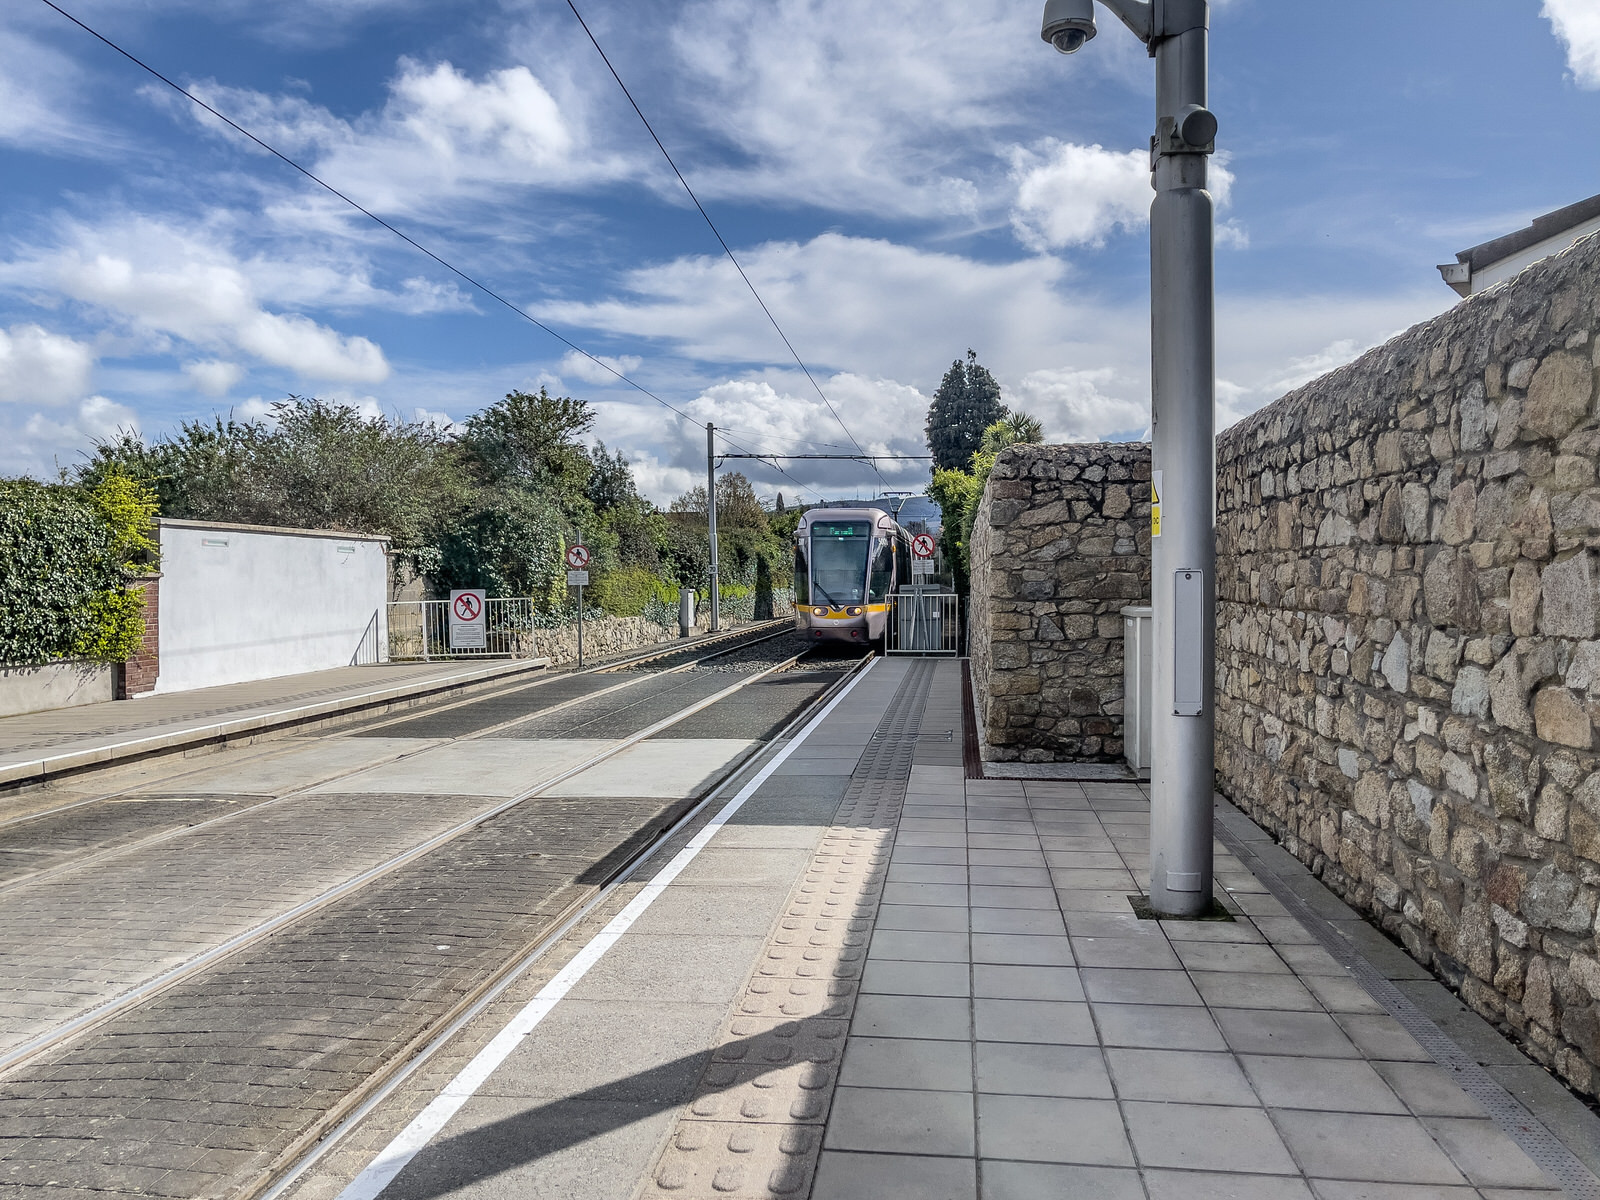 LUAS TRAM STOP AT WINDY ARBOUR AND THE IMMEDIATE AREA